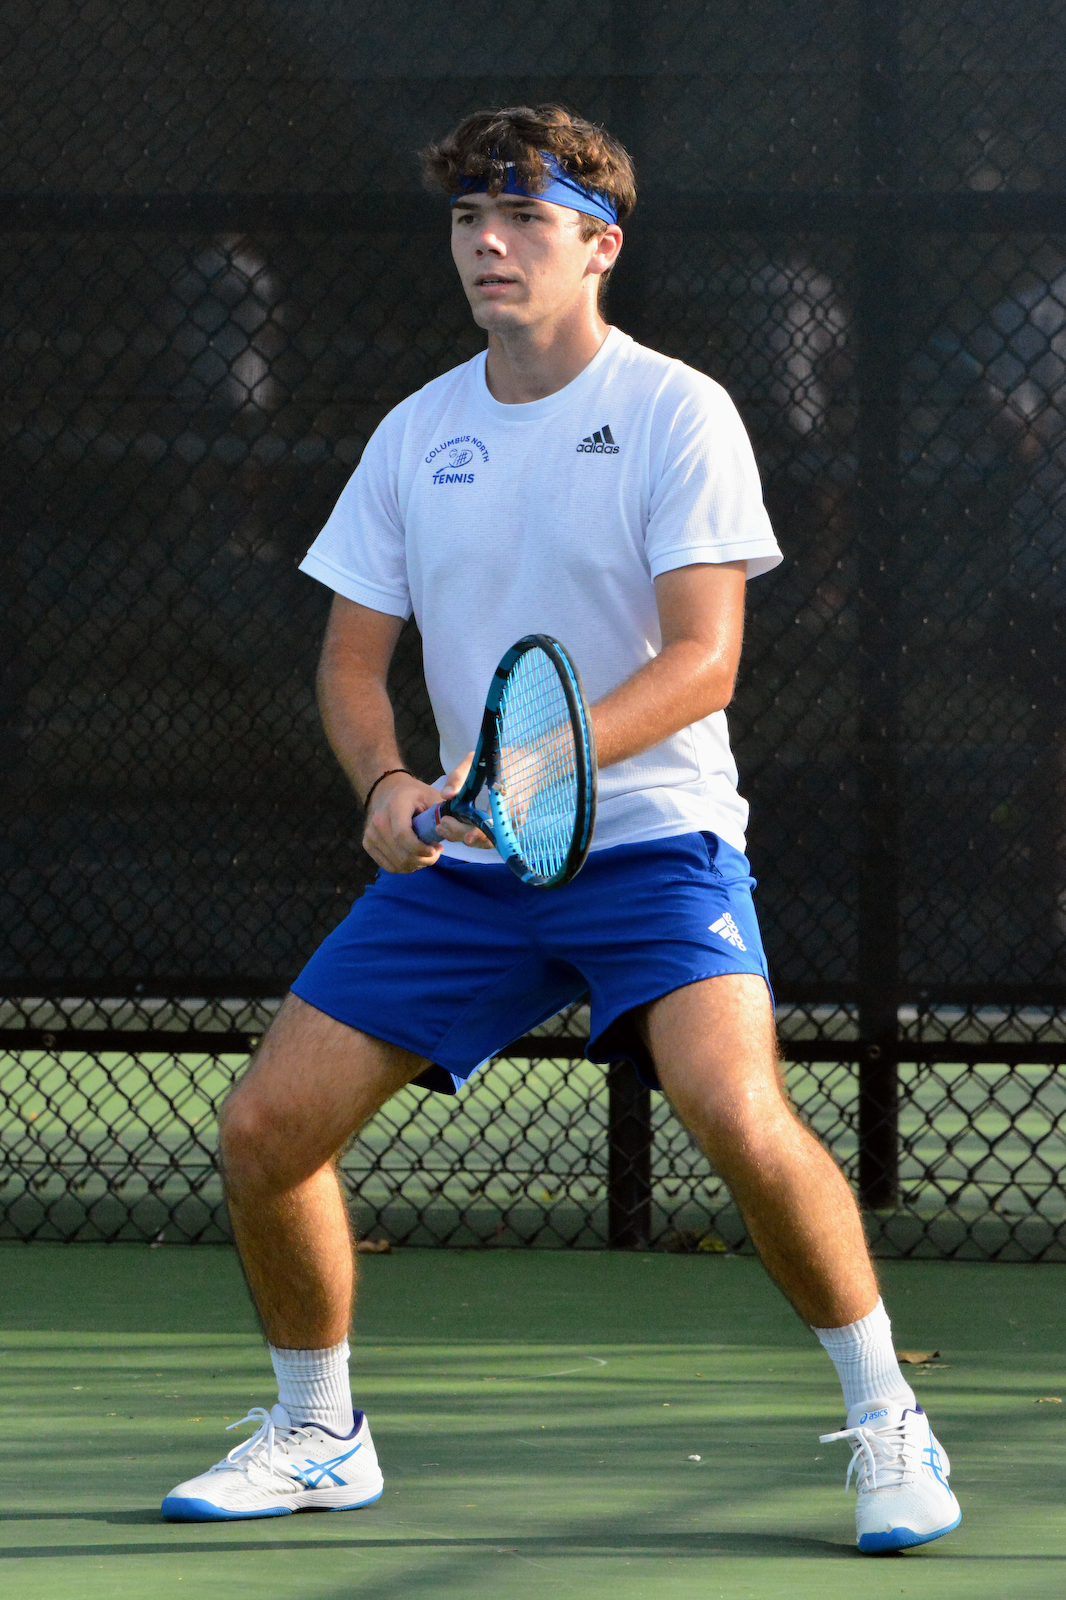 Bull Dogs blank Silver Creek in boys tennis cover photo